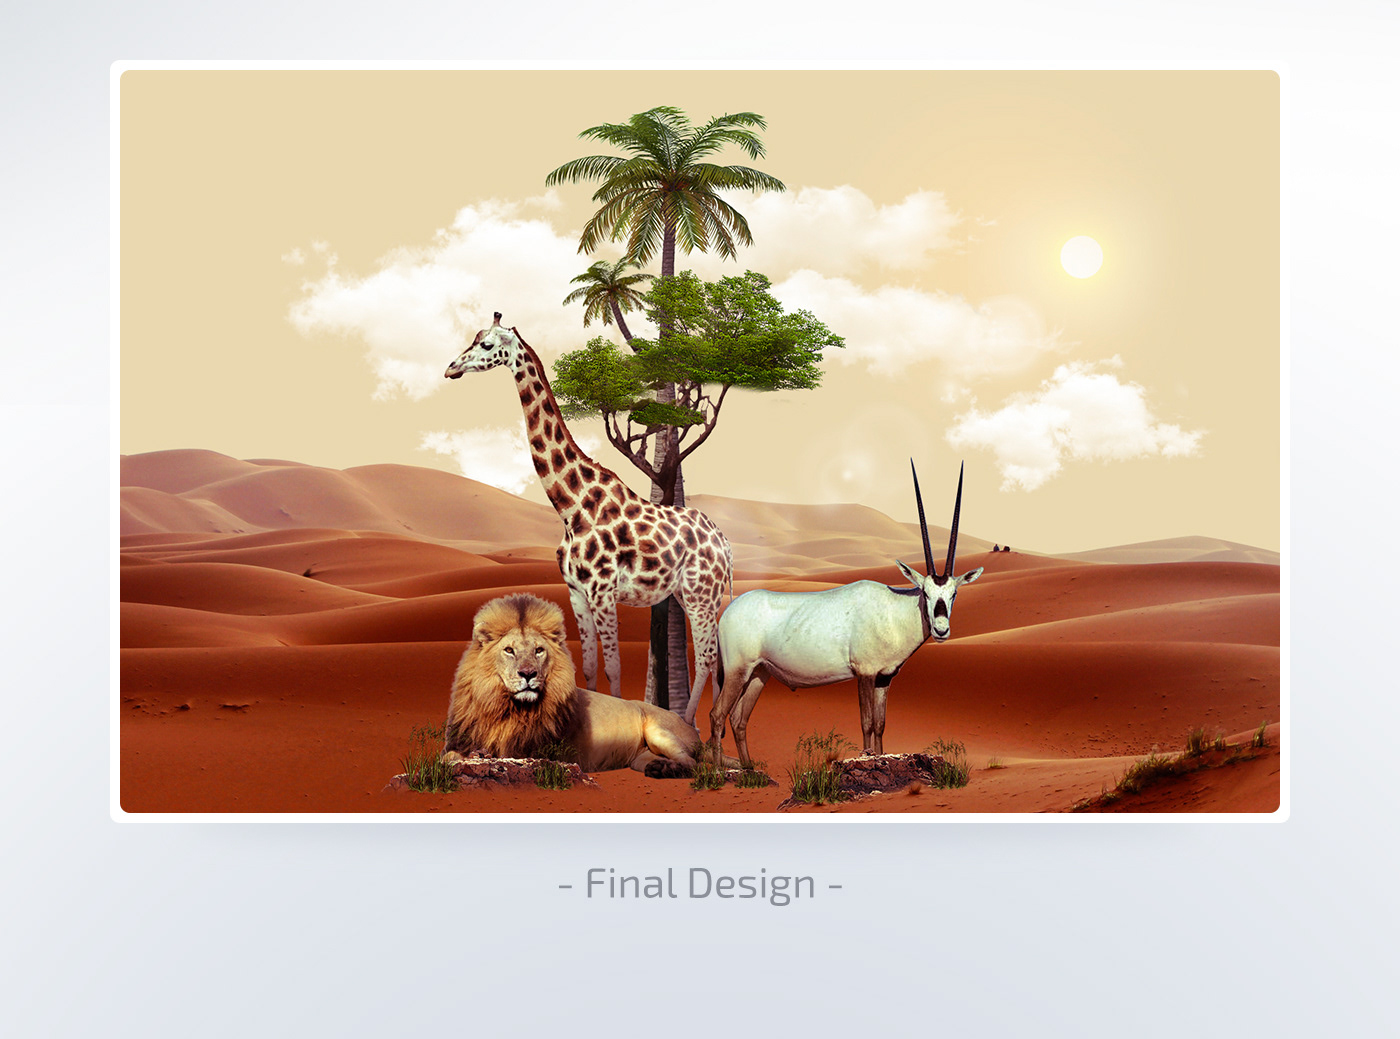 zoo animals Web Mobile Application UI animation  interaction creative icons